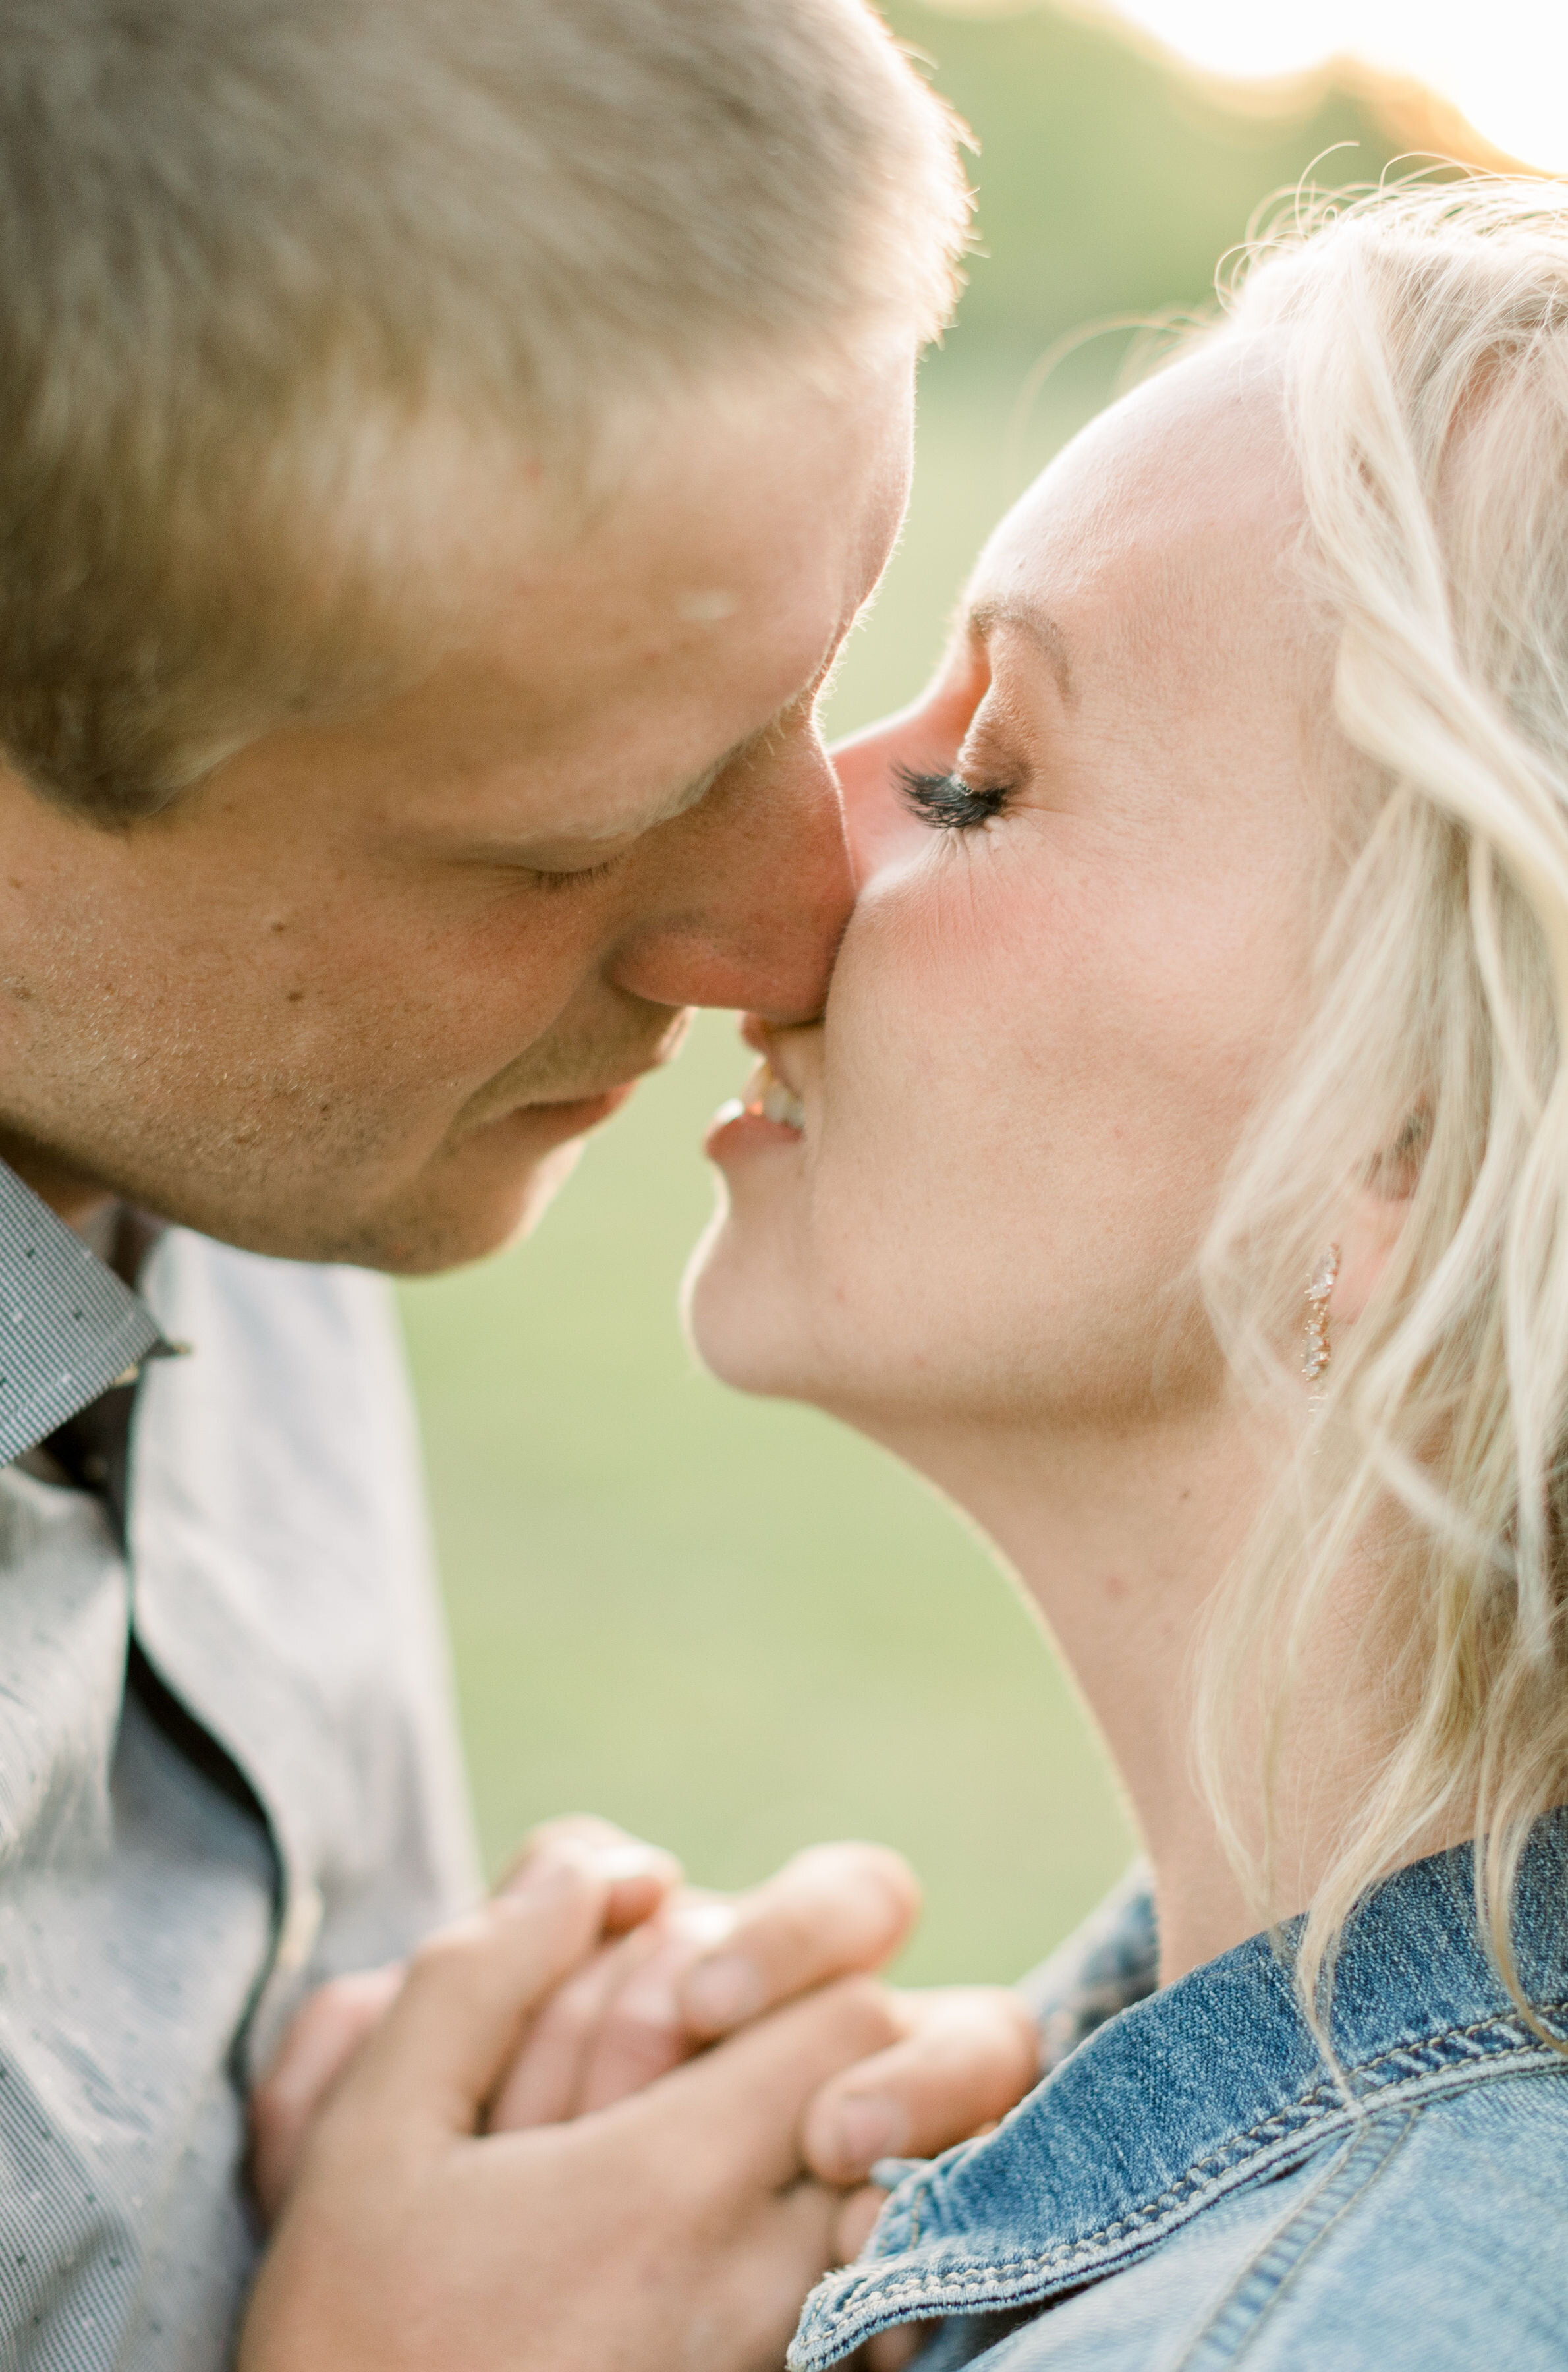  During this romantic southern-styled engagement session in Ottawa, Canada, Chelsea Mason Photography captures this groom leaning in to tenderly kiss his fiancé. couple kissing up close women's denim jacket women's blonde wild. engagement hair #Chels